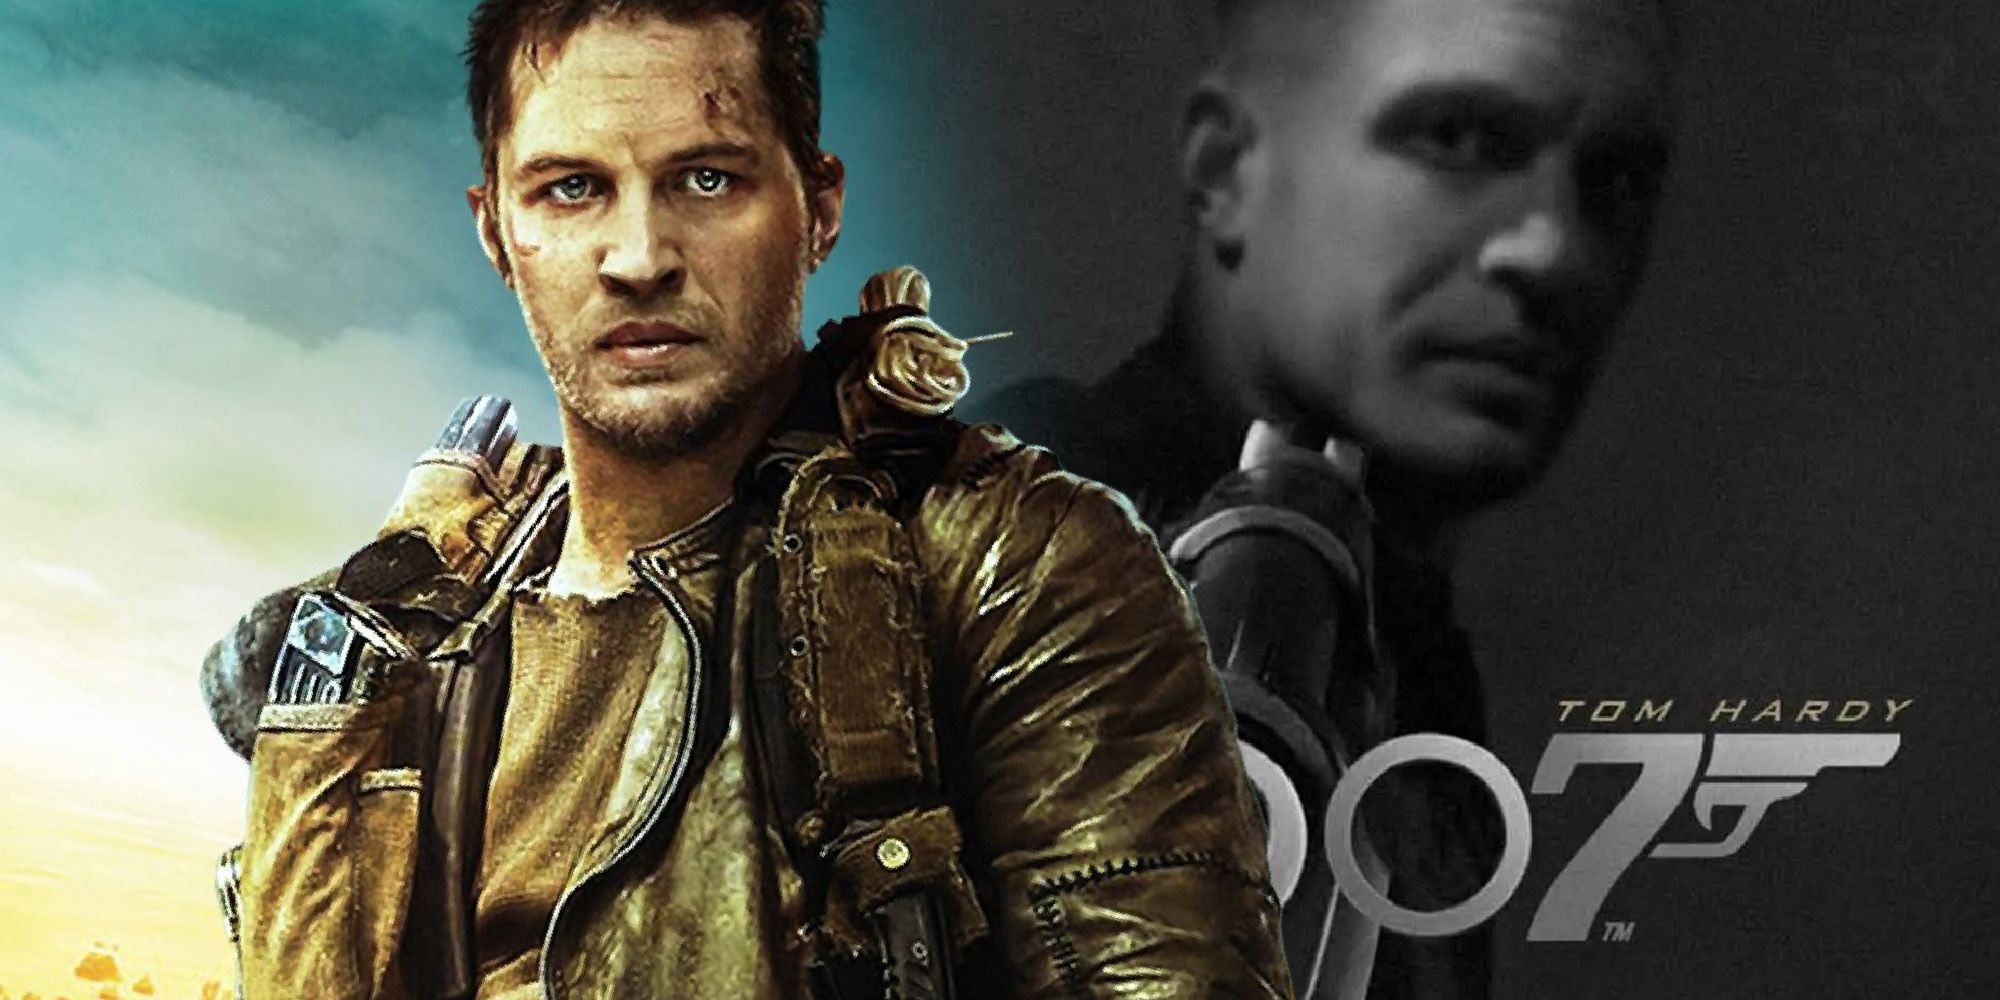 Tom Hardy’s Bond Is Good News For Mad Max